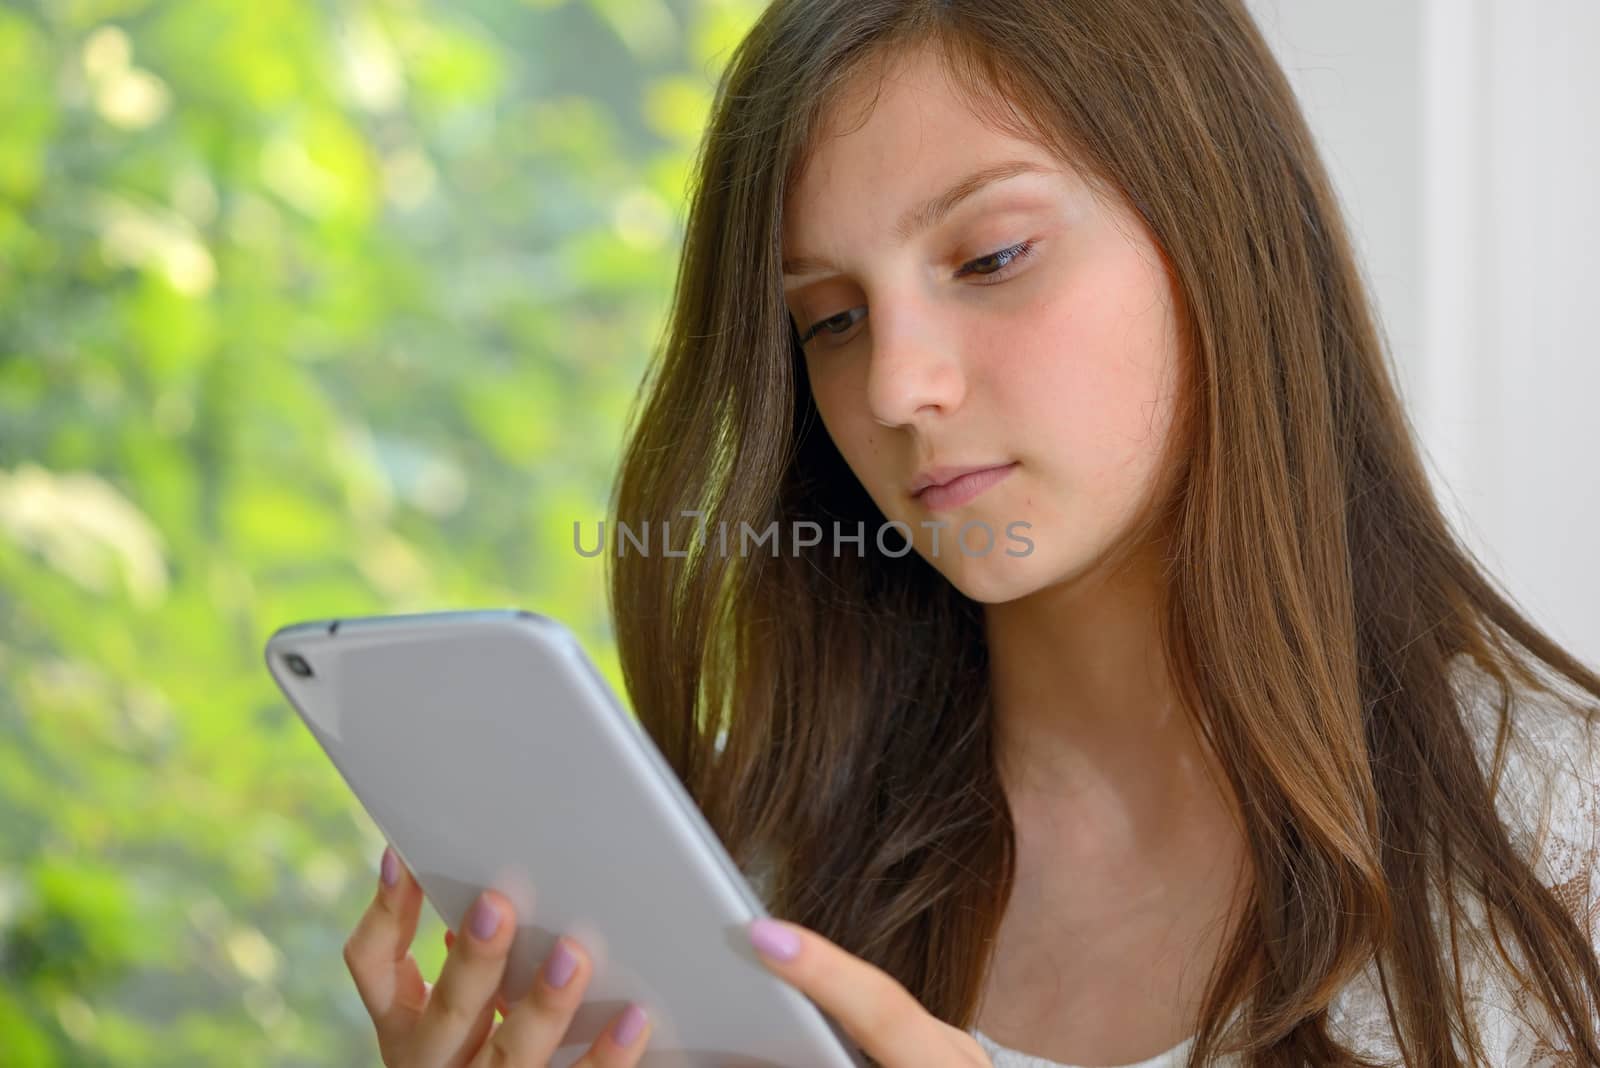 Serious young girl reading information on a tablet computer